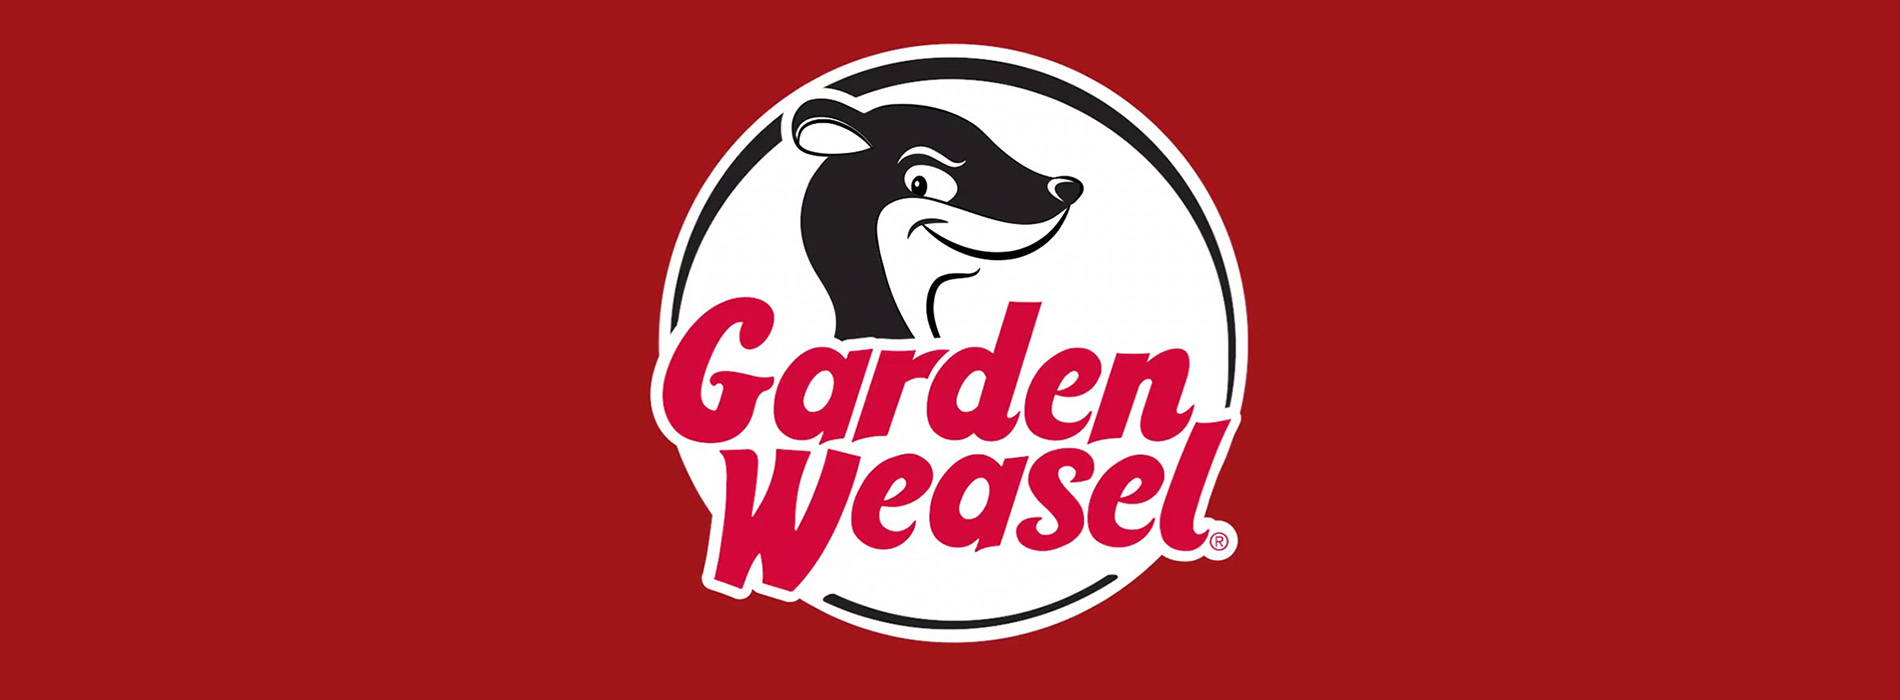 General Tools Grows with the addition of Garden Weasel to its expanding Brand Portfolio